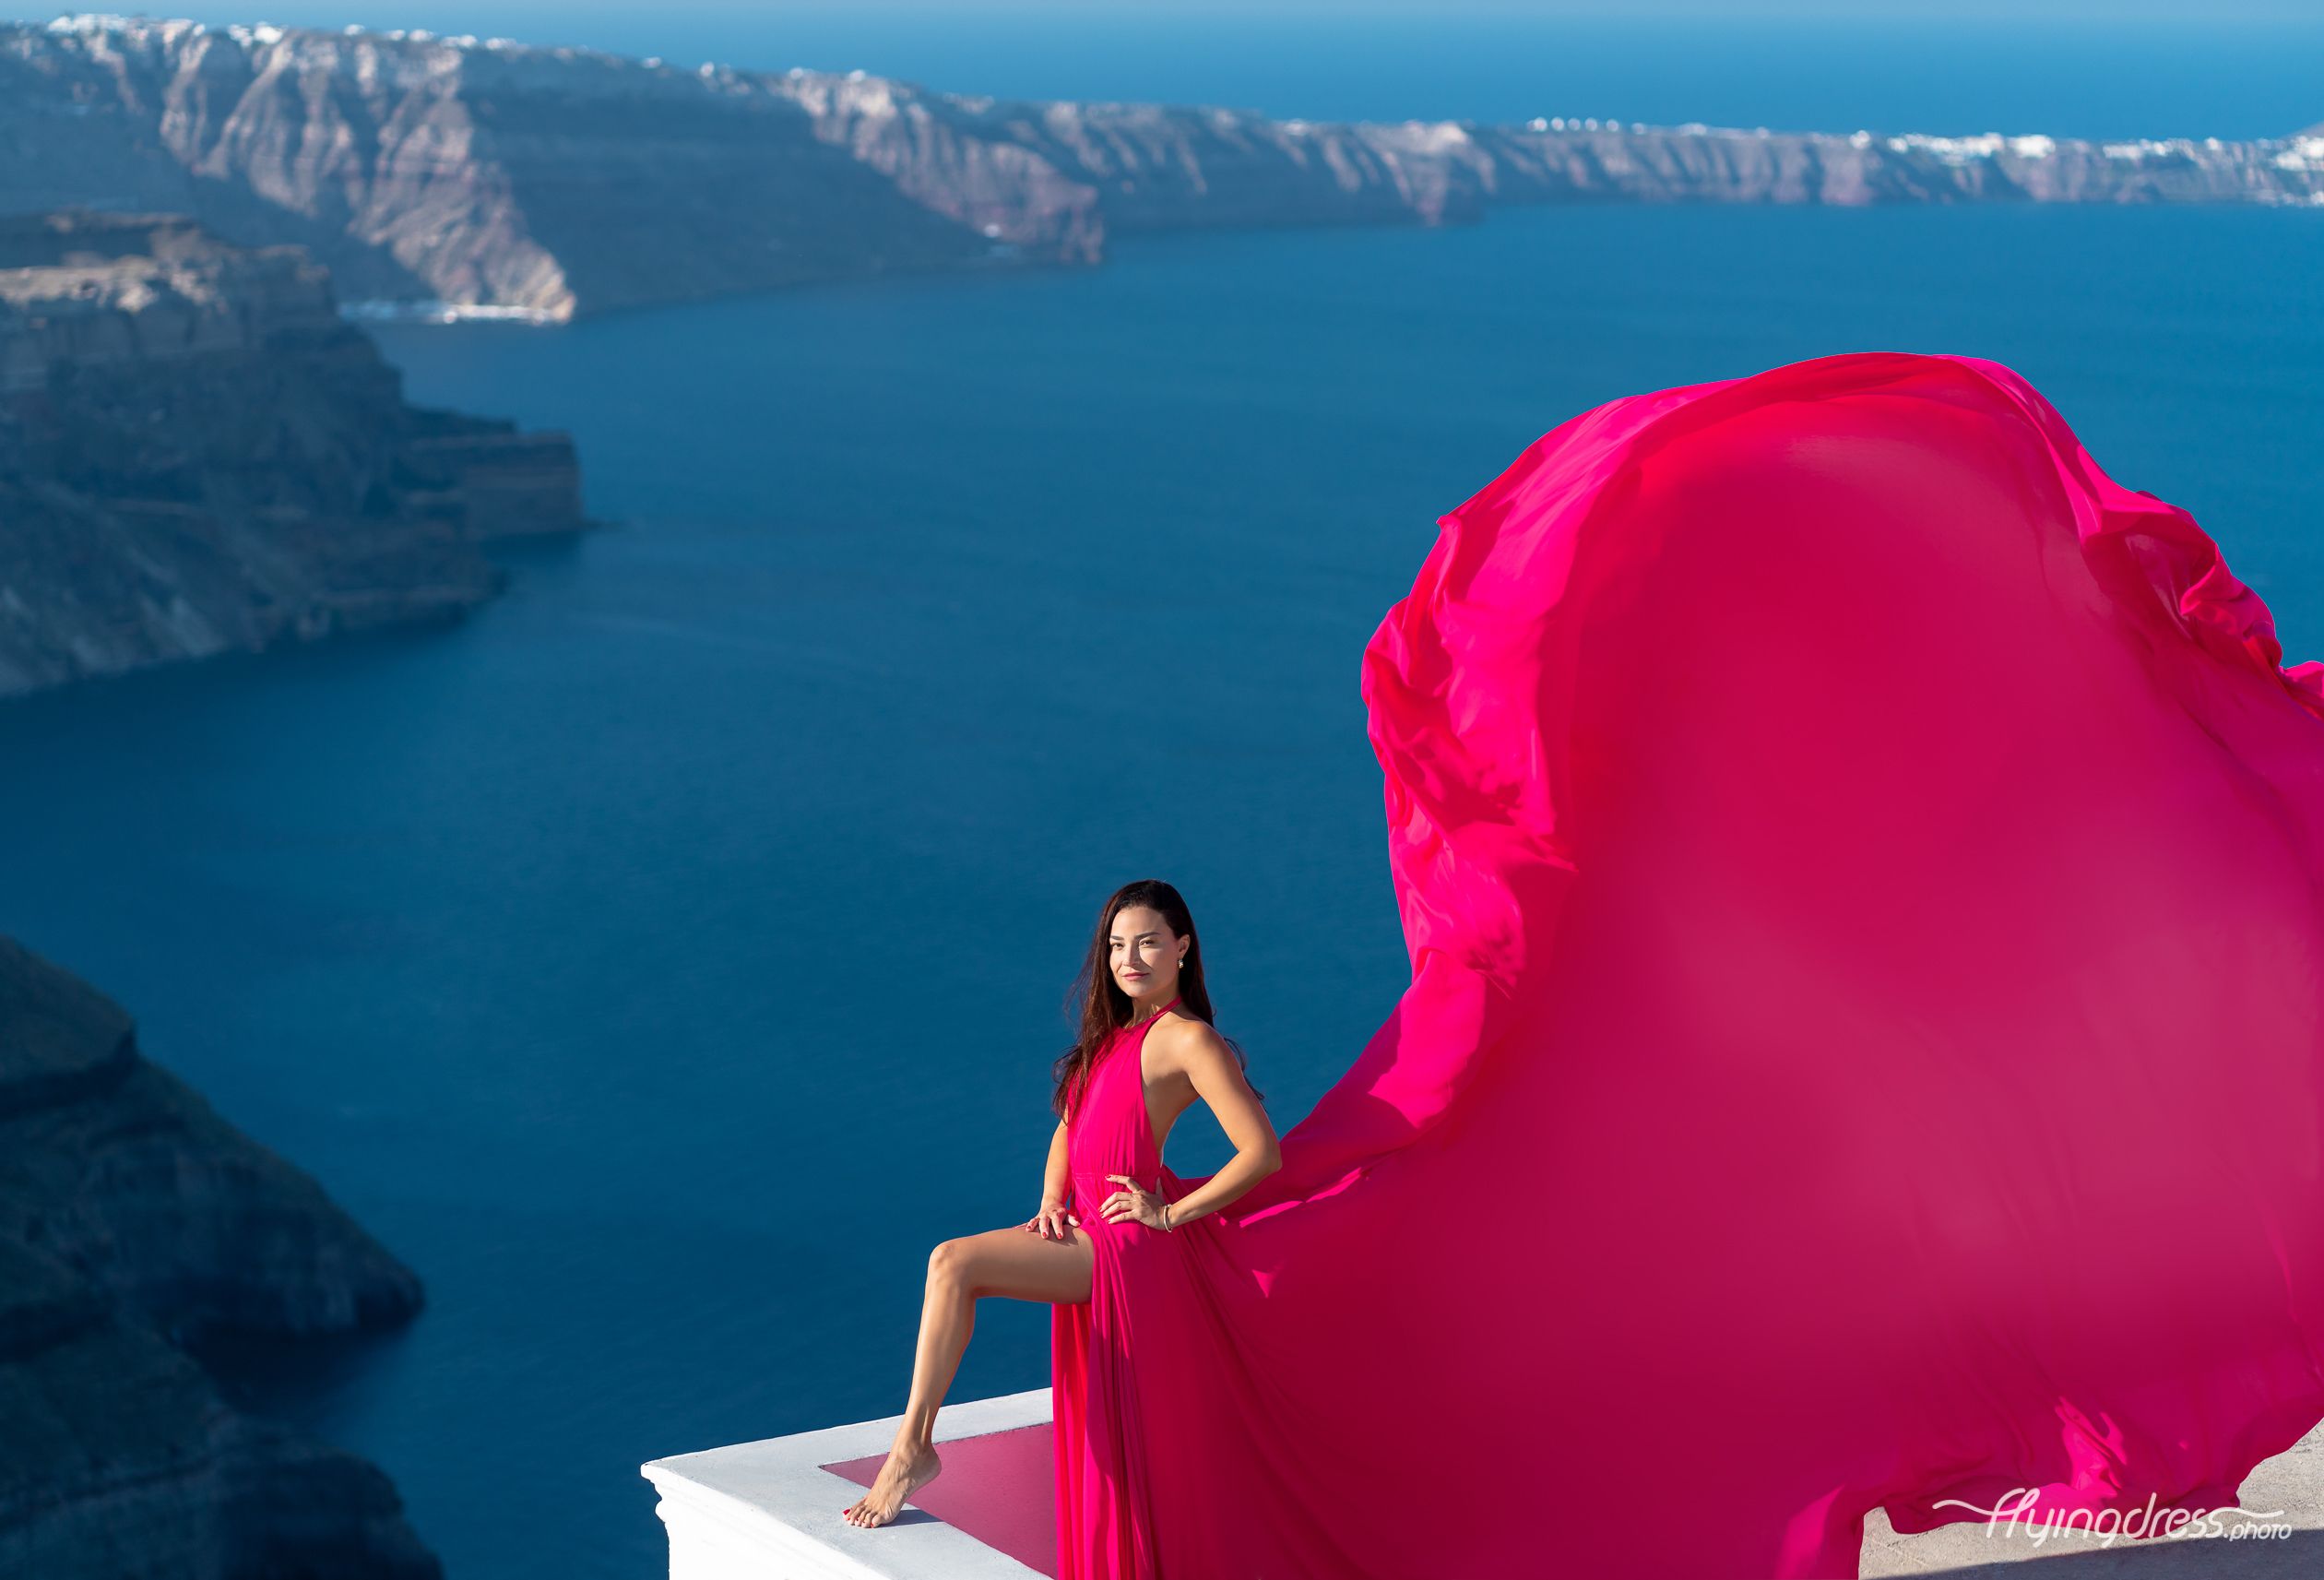 Gracefully adorned in a vibrant fuchsia pink flying dress, a lady becomes a vision of elegance and movement, her attire flowing with whimsical beauty against the backdrop of Santorini's breathtaking landscapes, capturing the essence of freedom and enchantment.